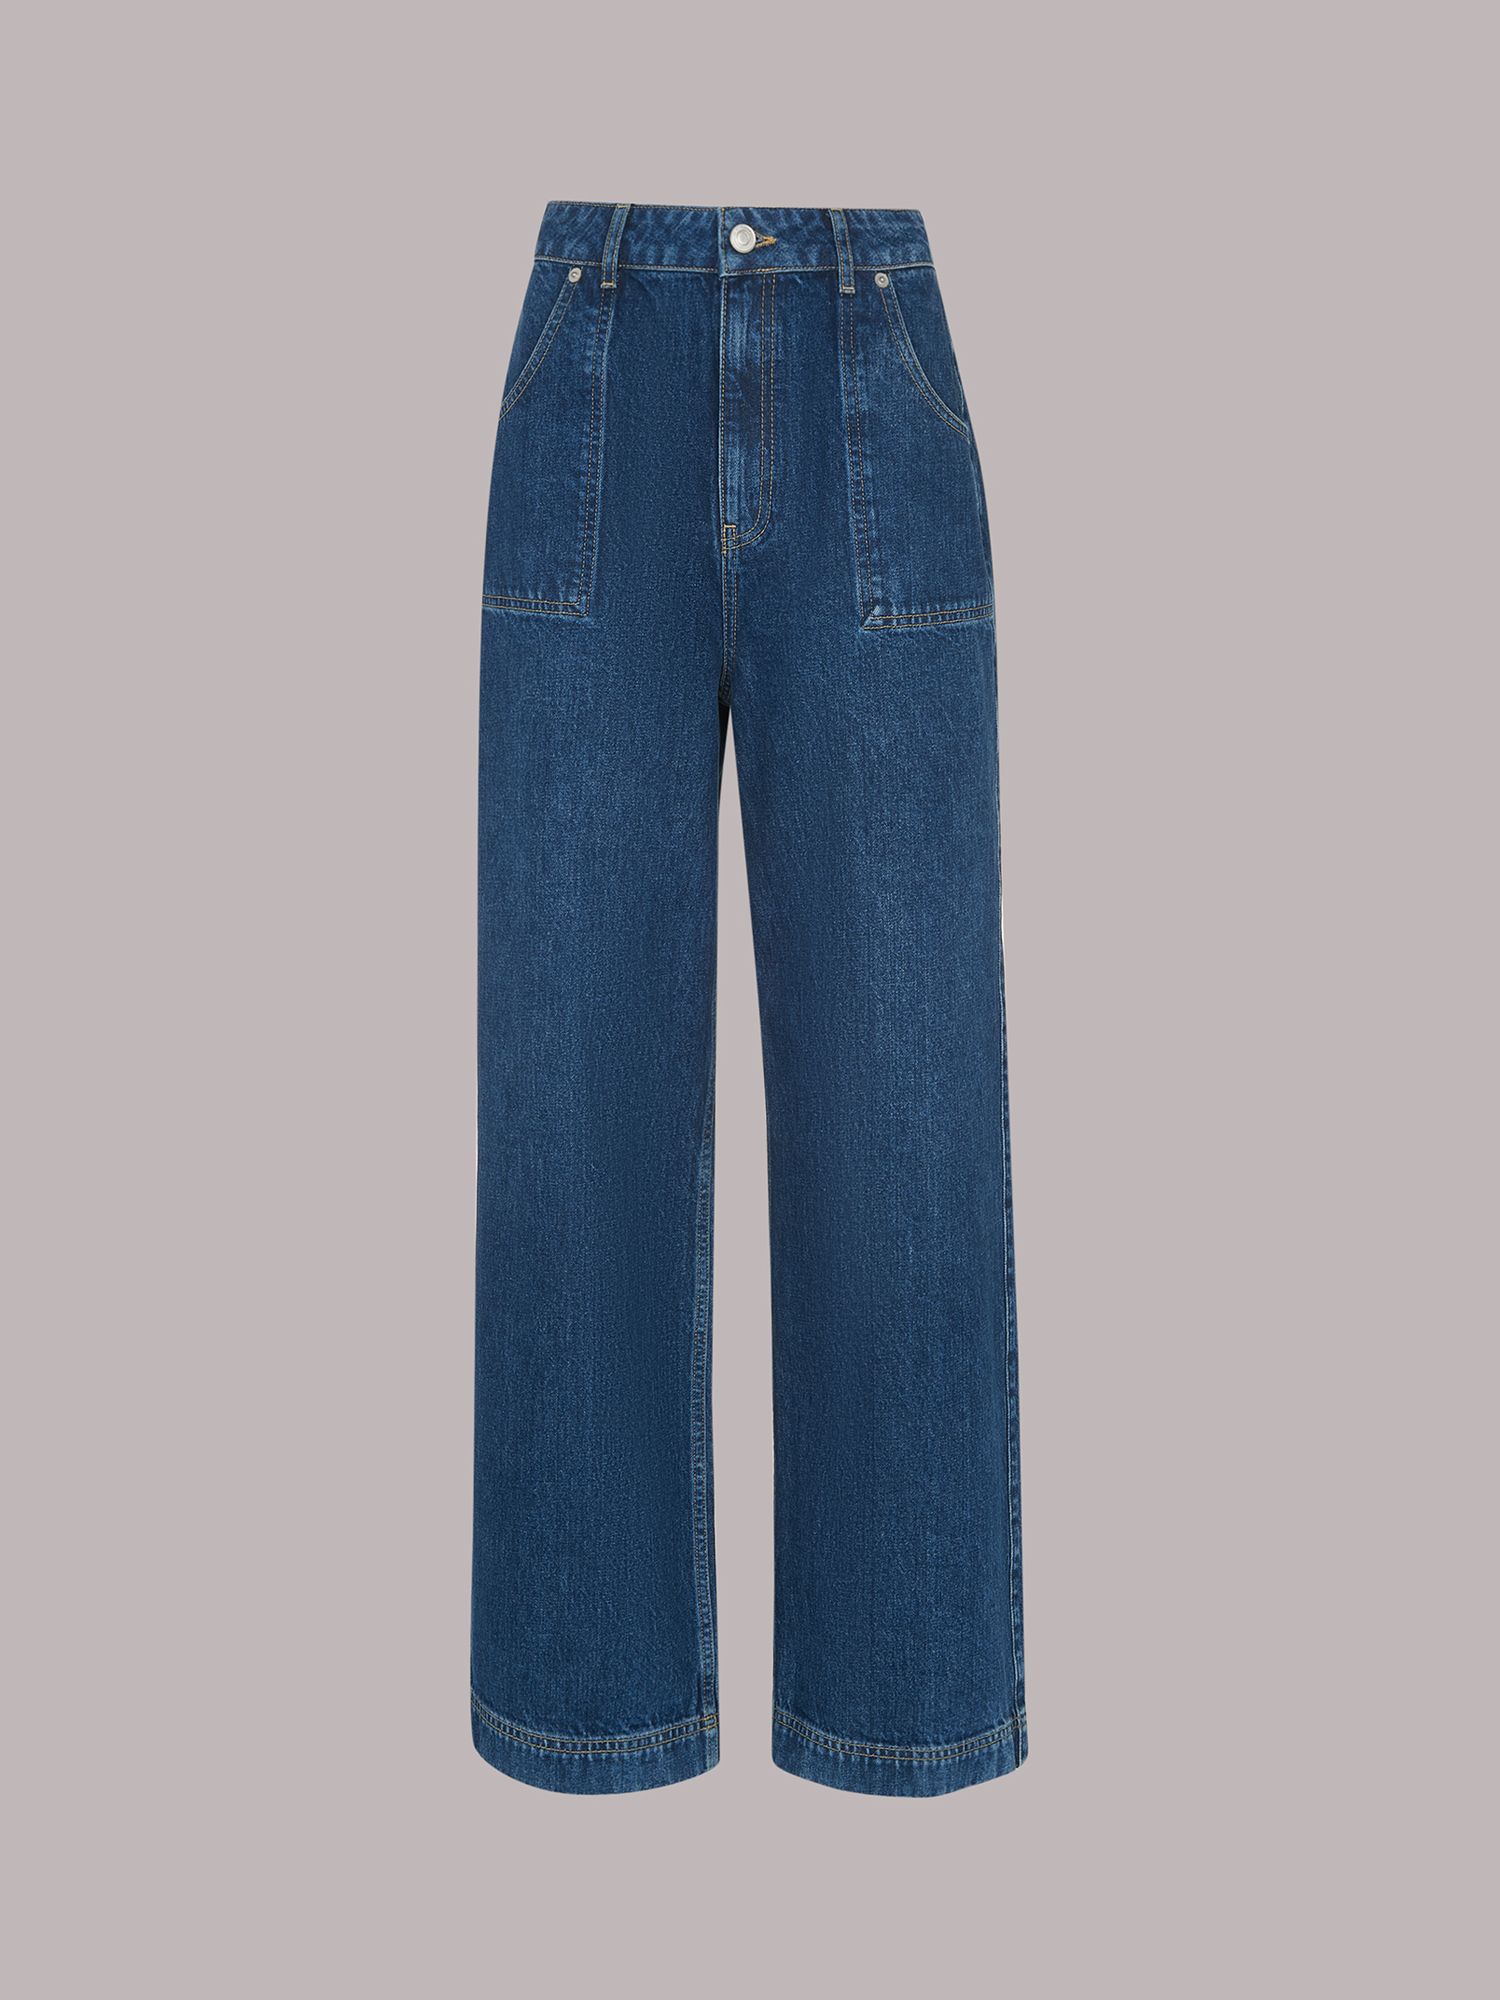 Whistles Petite Authentic Raya Straight Jeans, Blue, 29